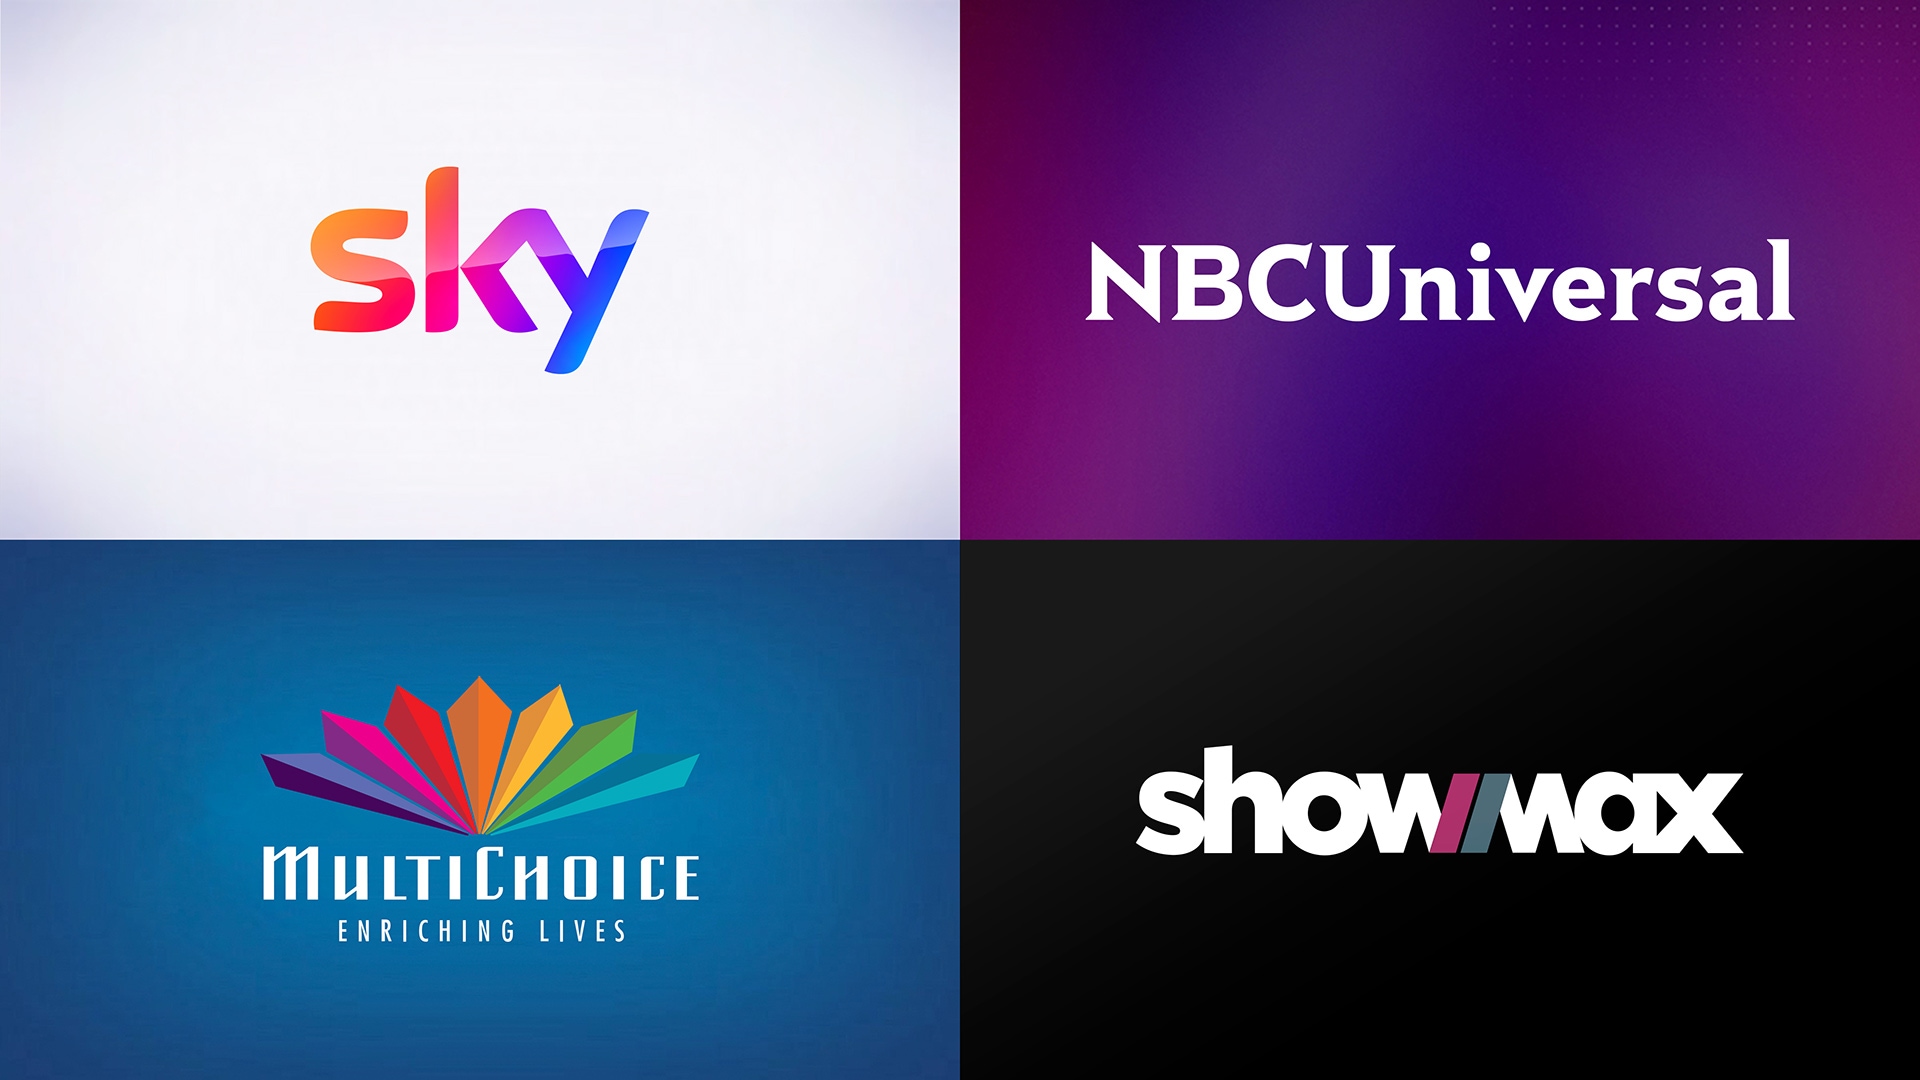 Multichoice - Mega Deal: MultiChoice Partners With Comcast’s NBC Universal and Sky To Create Leading African Streaming Service